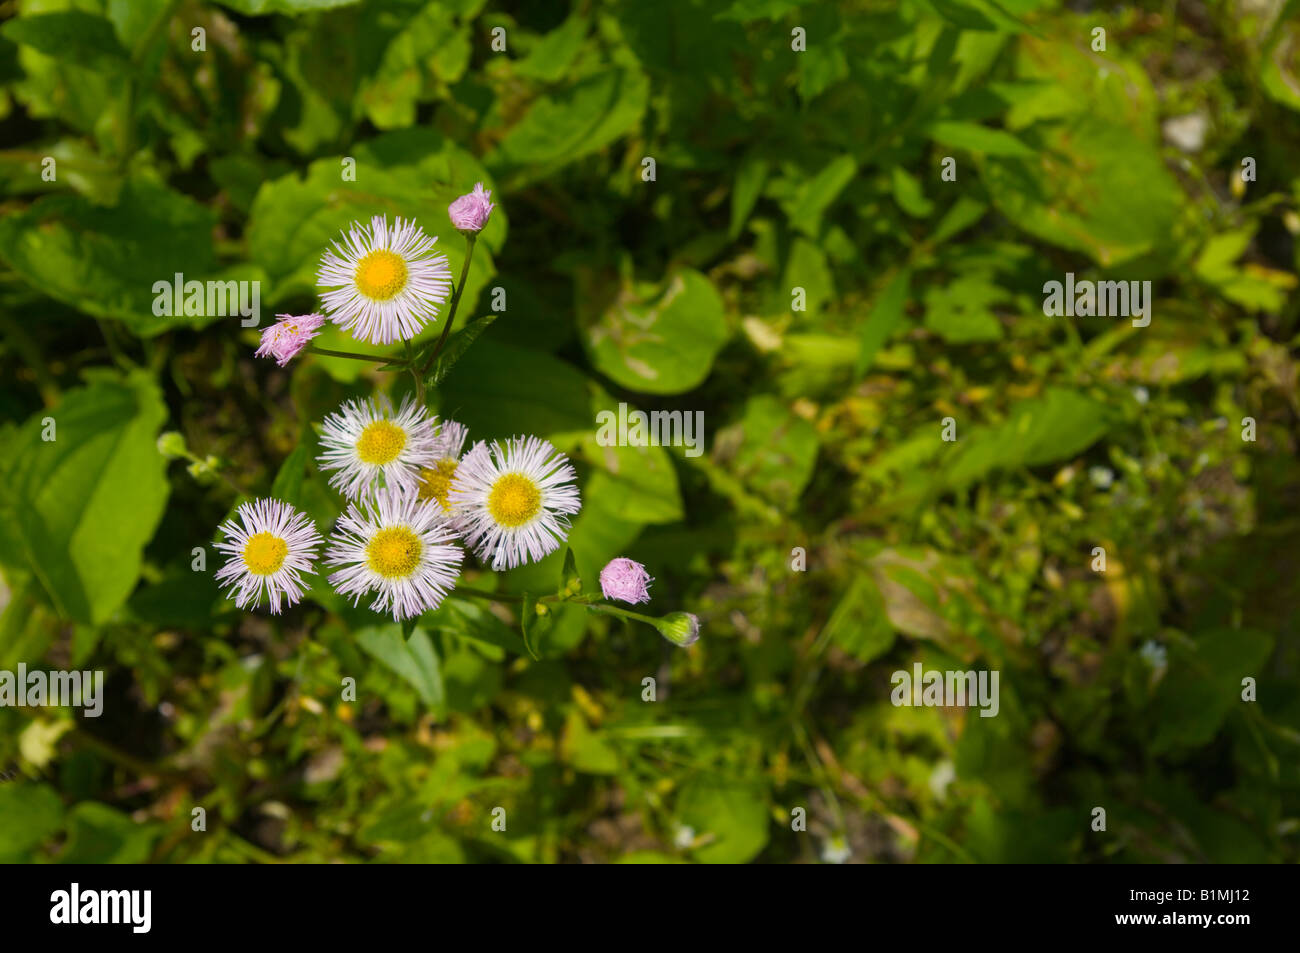 Common Fleabane in bloom with partially open blooms showing fuzziness of leaves Stock Photo